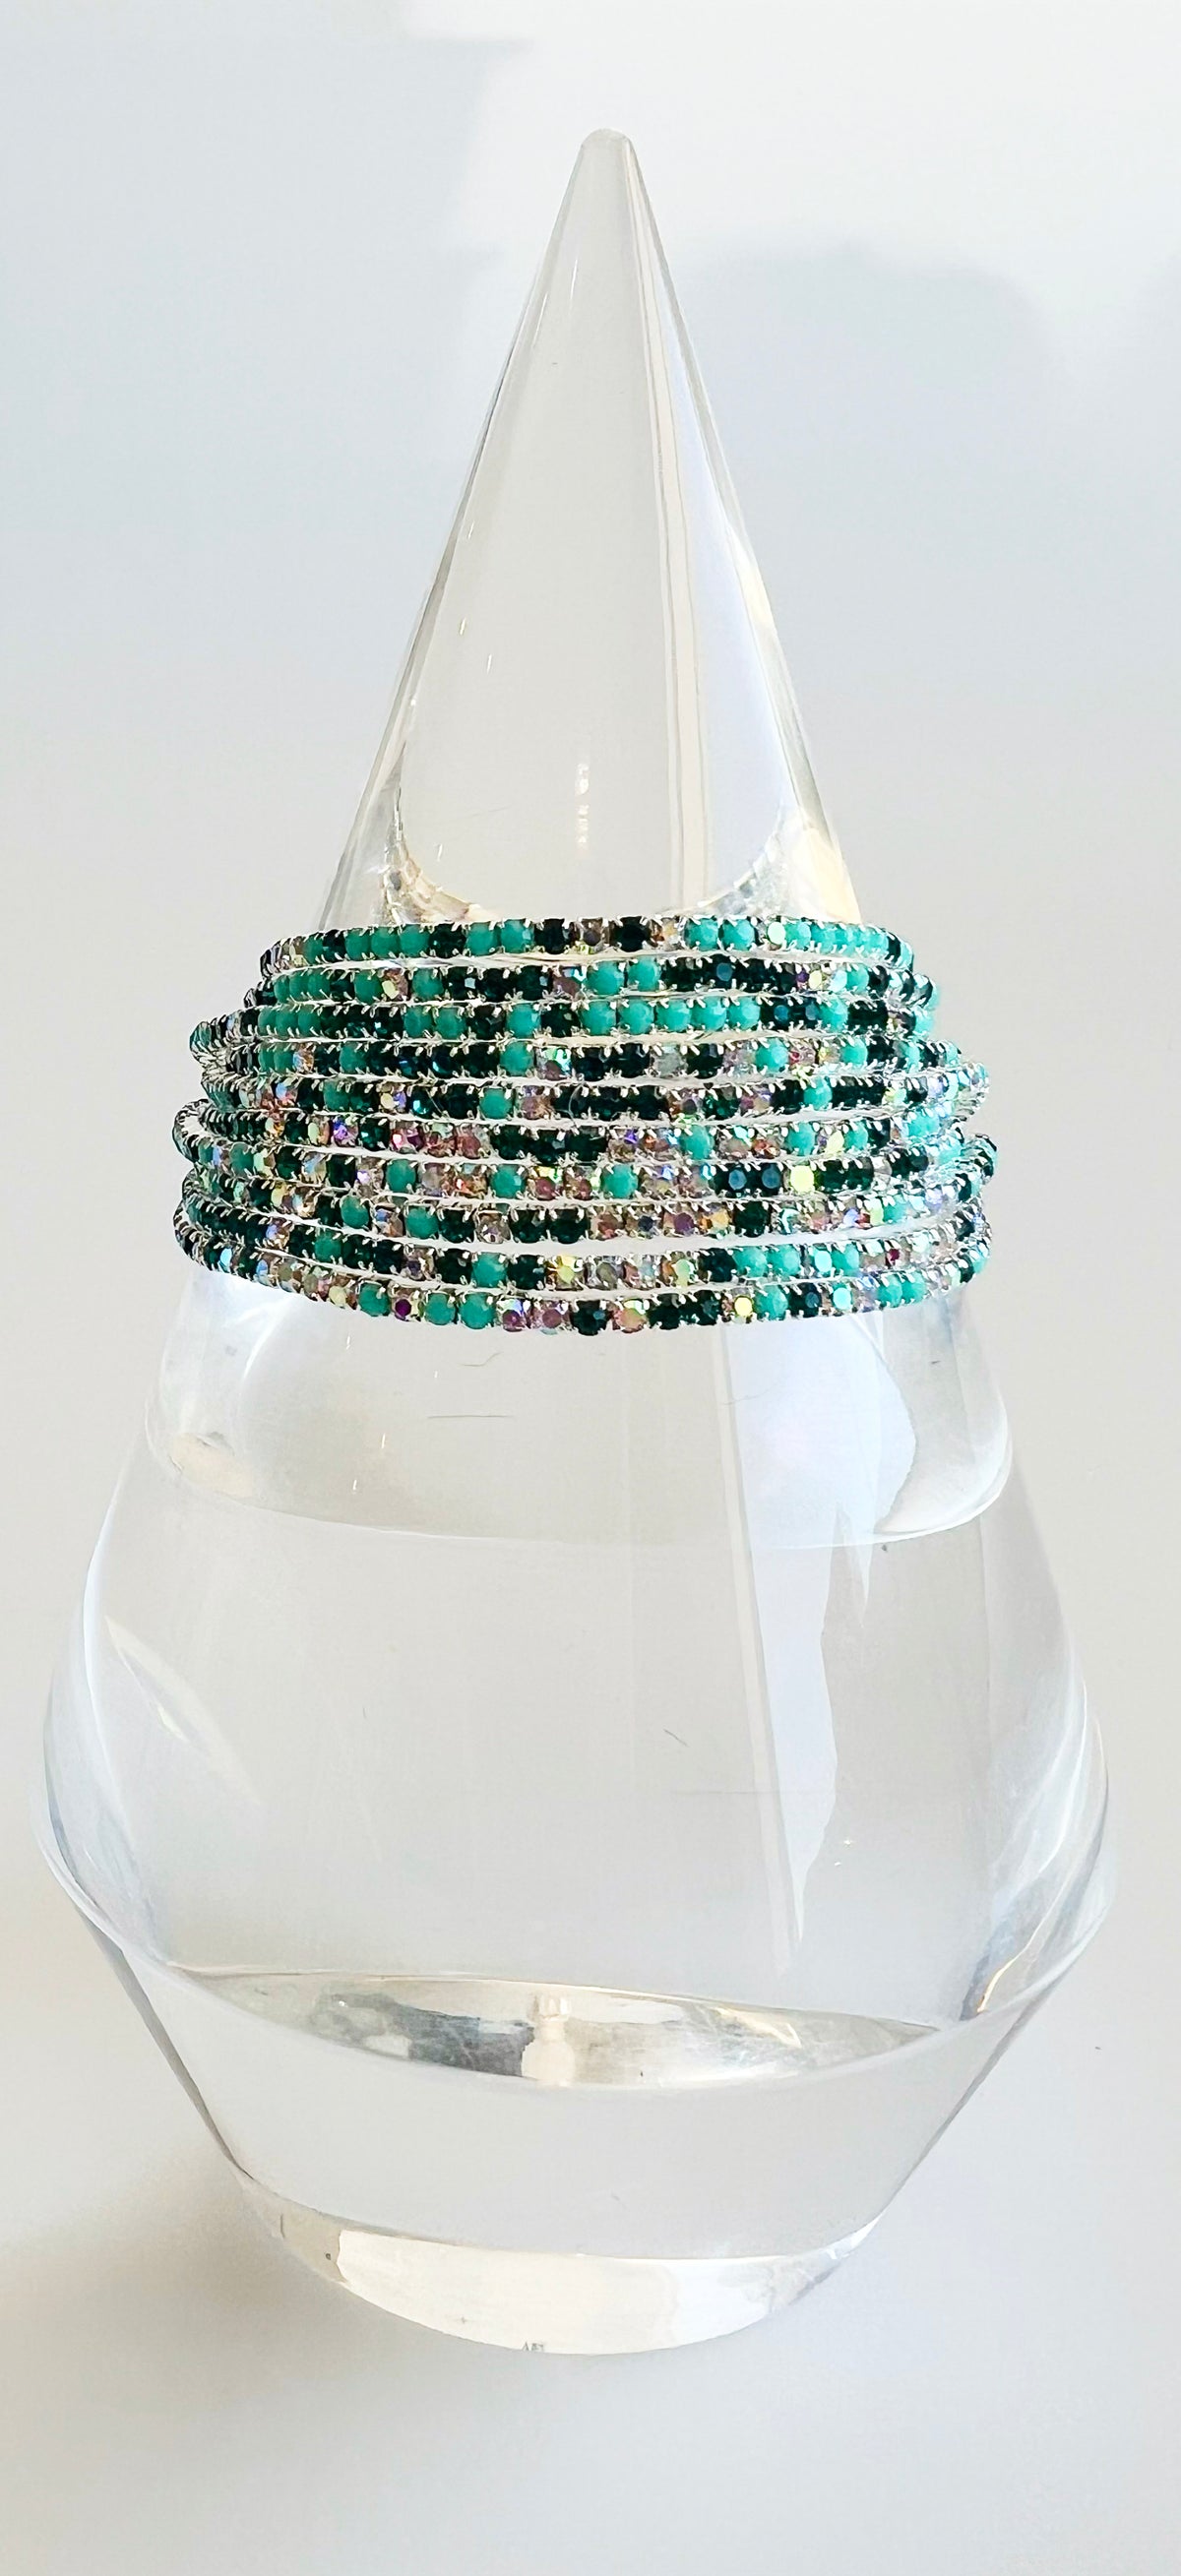 Cz Sparkling Elastic Bracelet - Silver & Turquoise-230 Jewelry-Darling-Coastal Bloom Boutique, find the trendiest versions of the popular styles and looks Located in Indialantic, FL